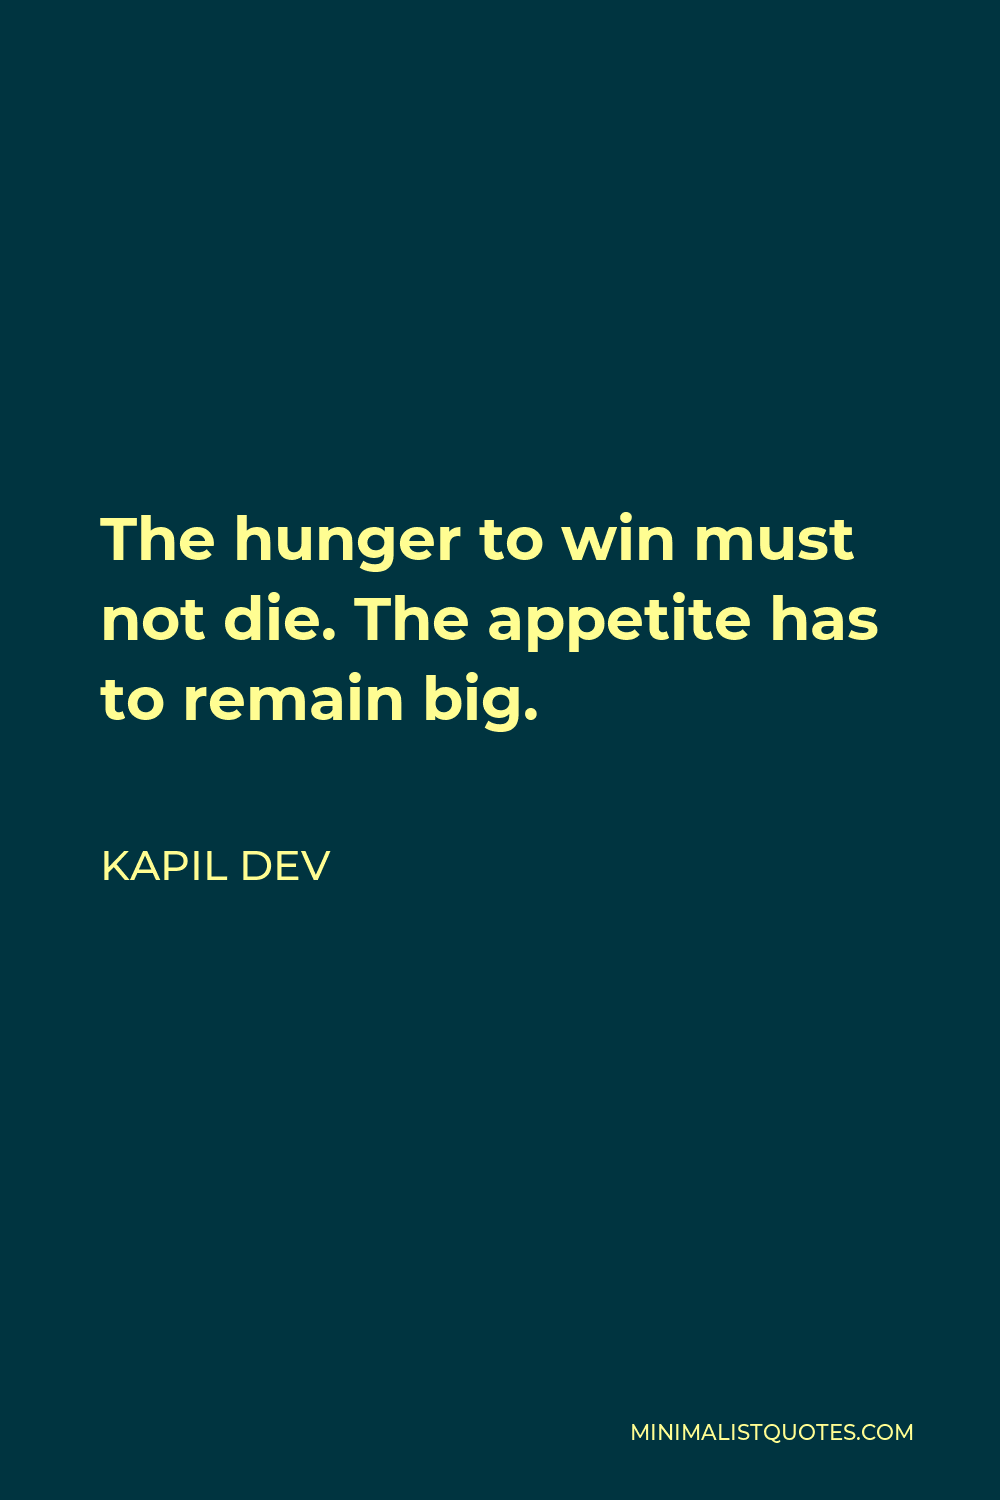 Kapil Dev Quote The Hunger To Win Must Not Die The Appetite Has To Remain Big